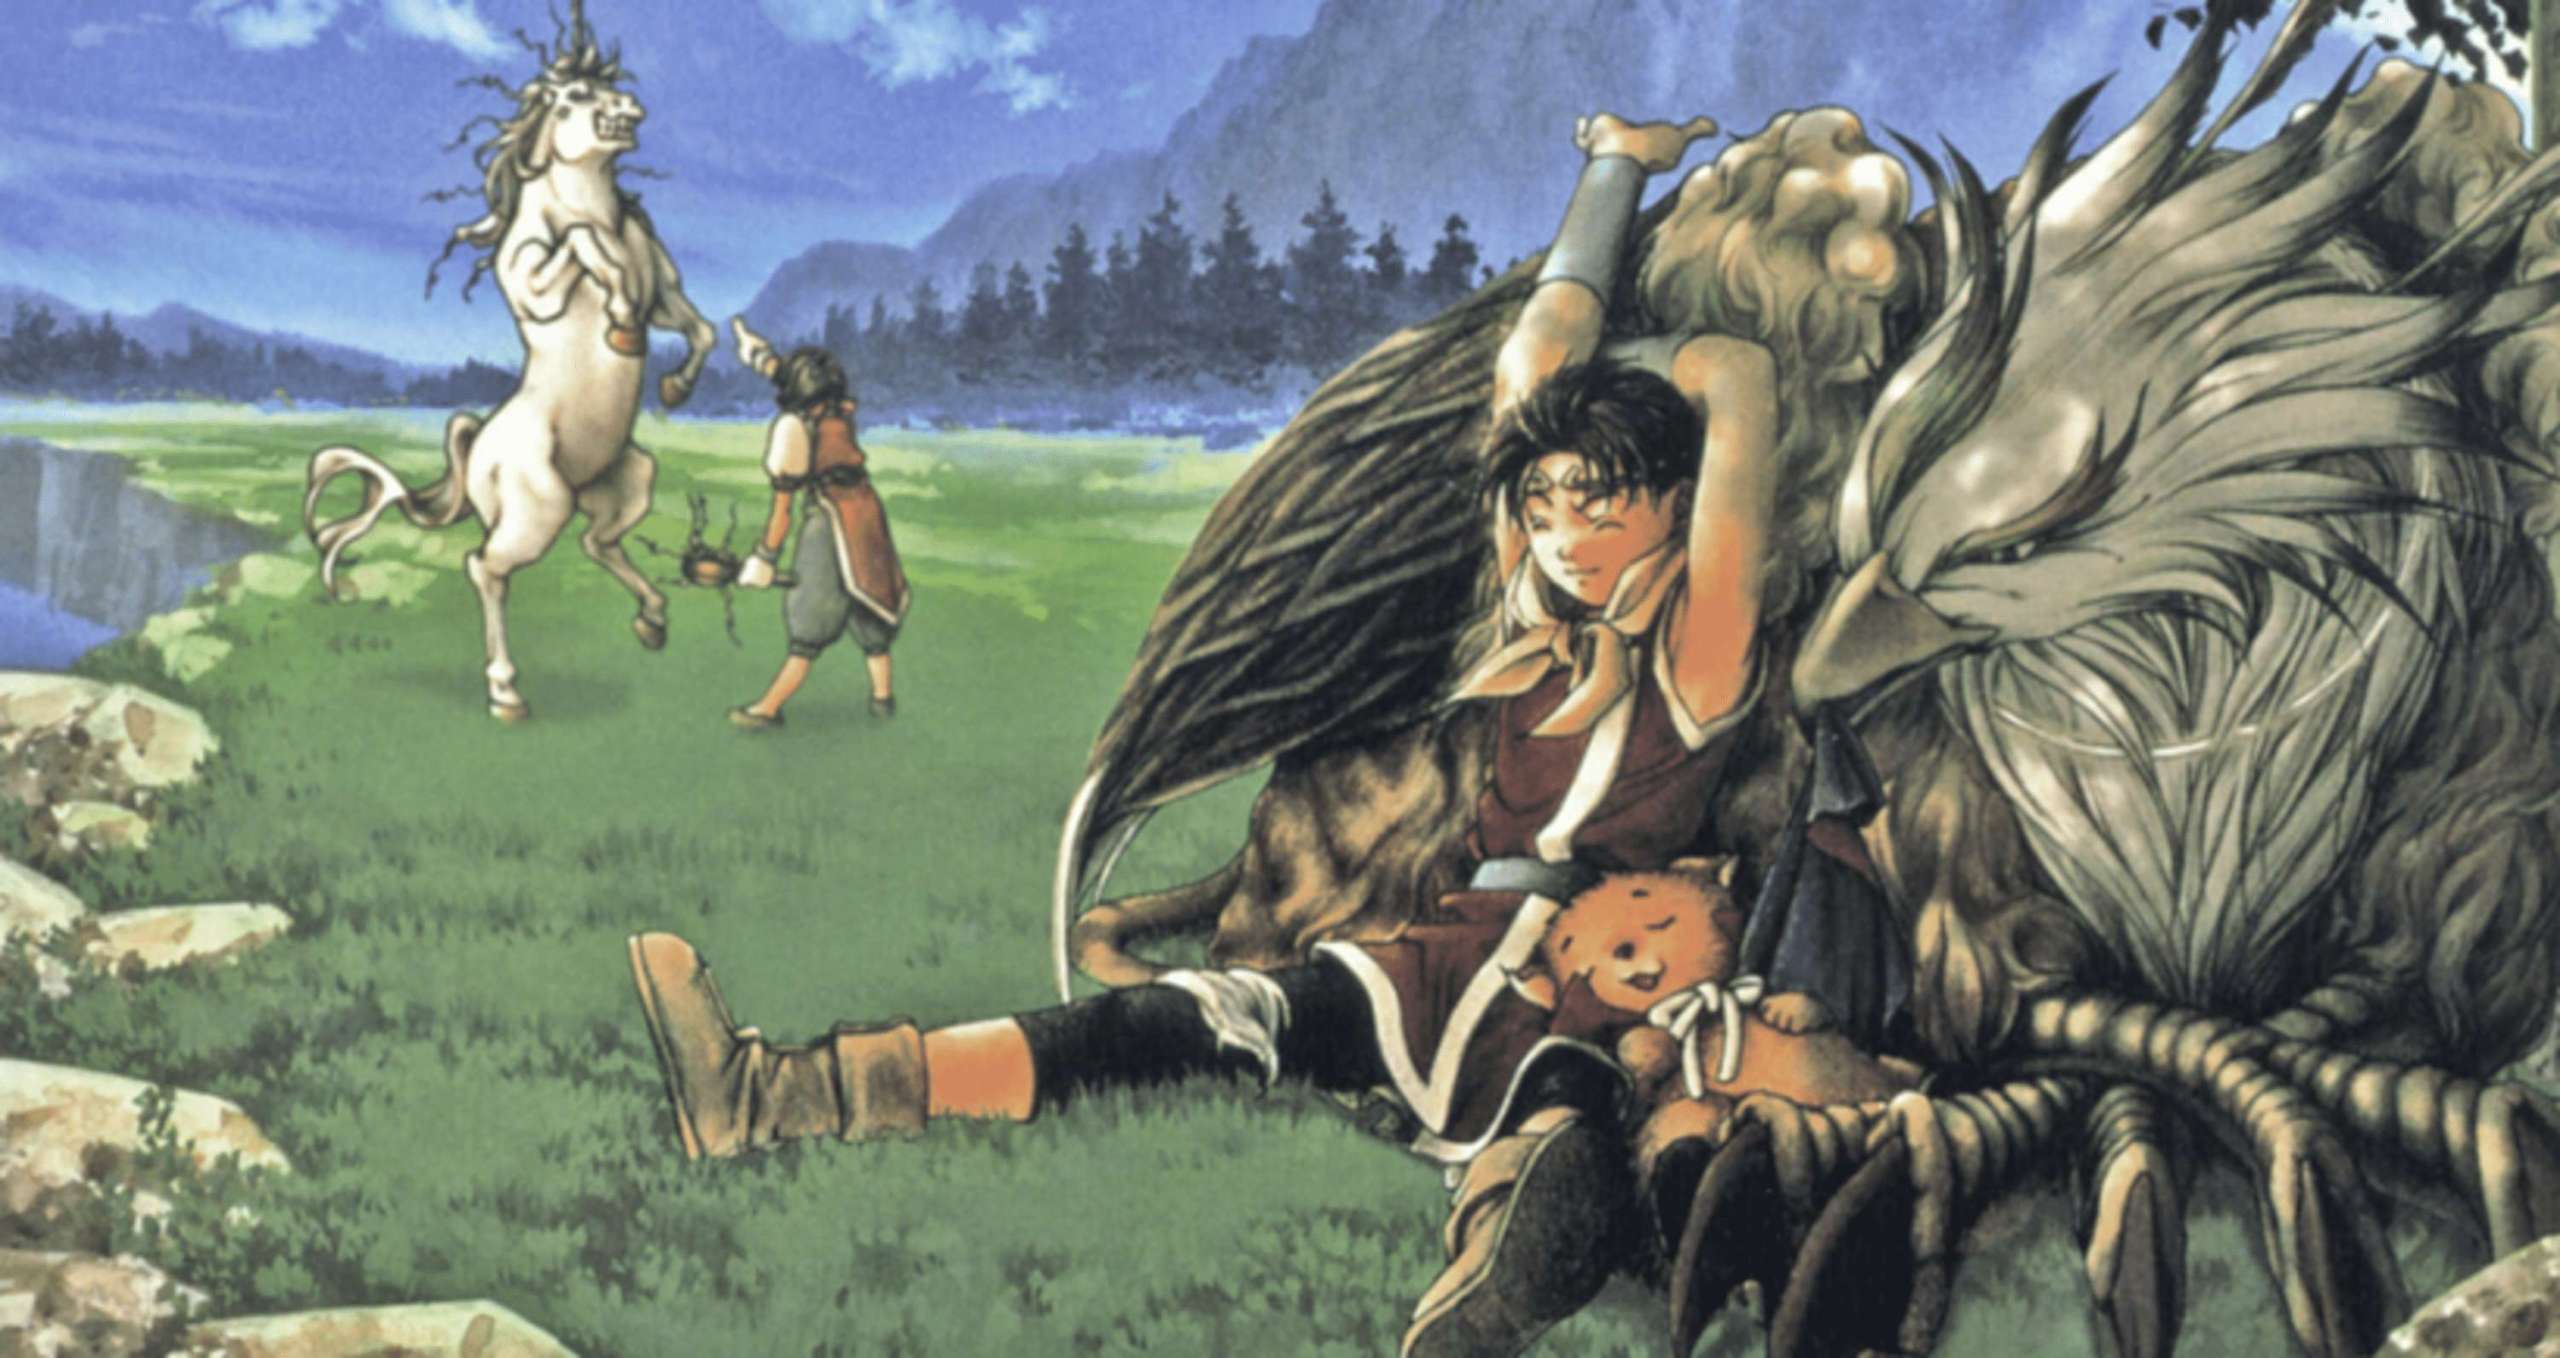 The Suikoden 1 And 2 Remastered Collection Has Been Announced, And It Will Arrive In 2023